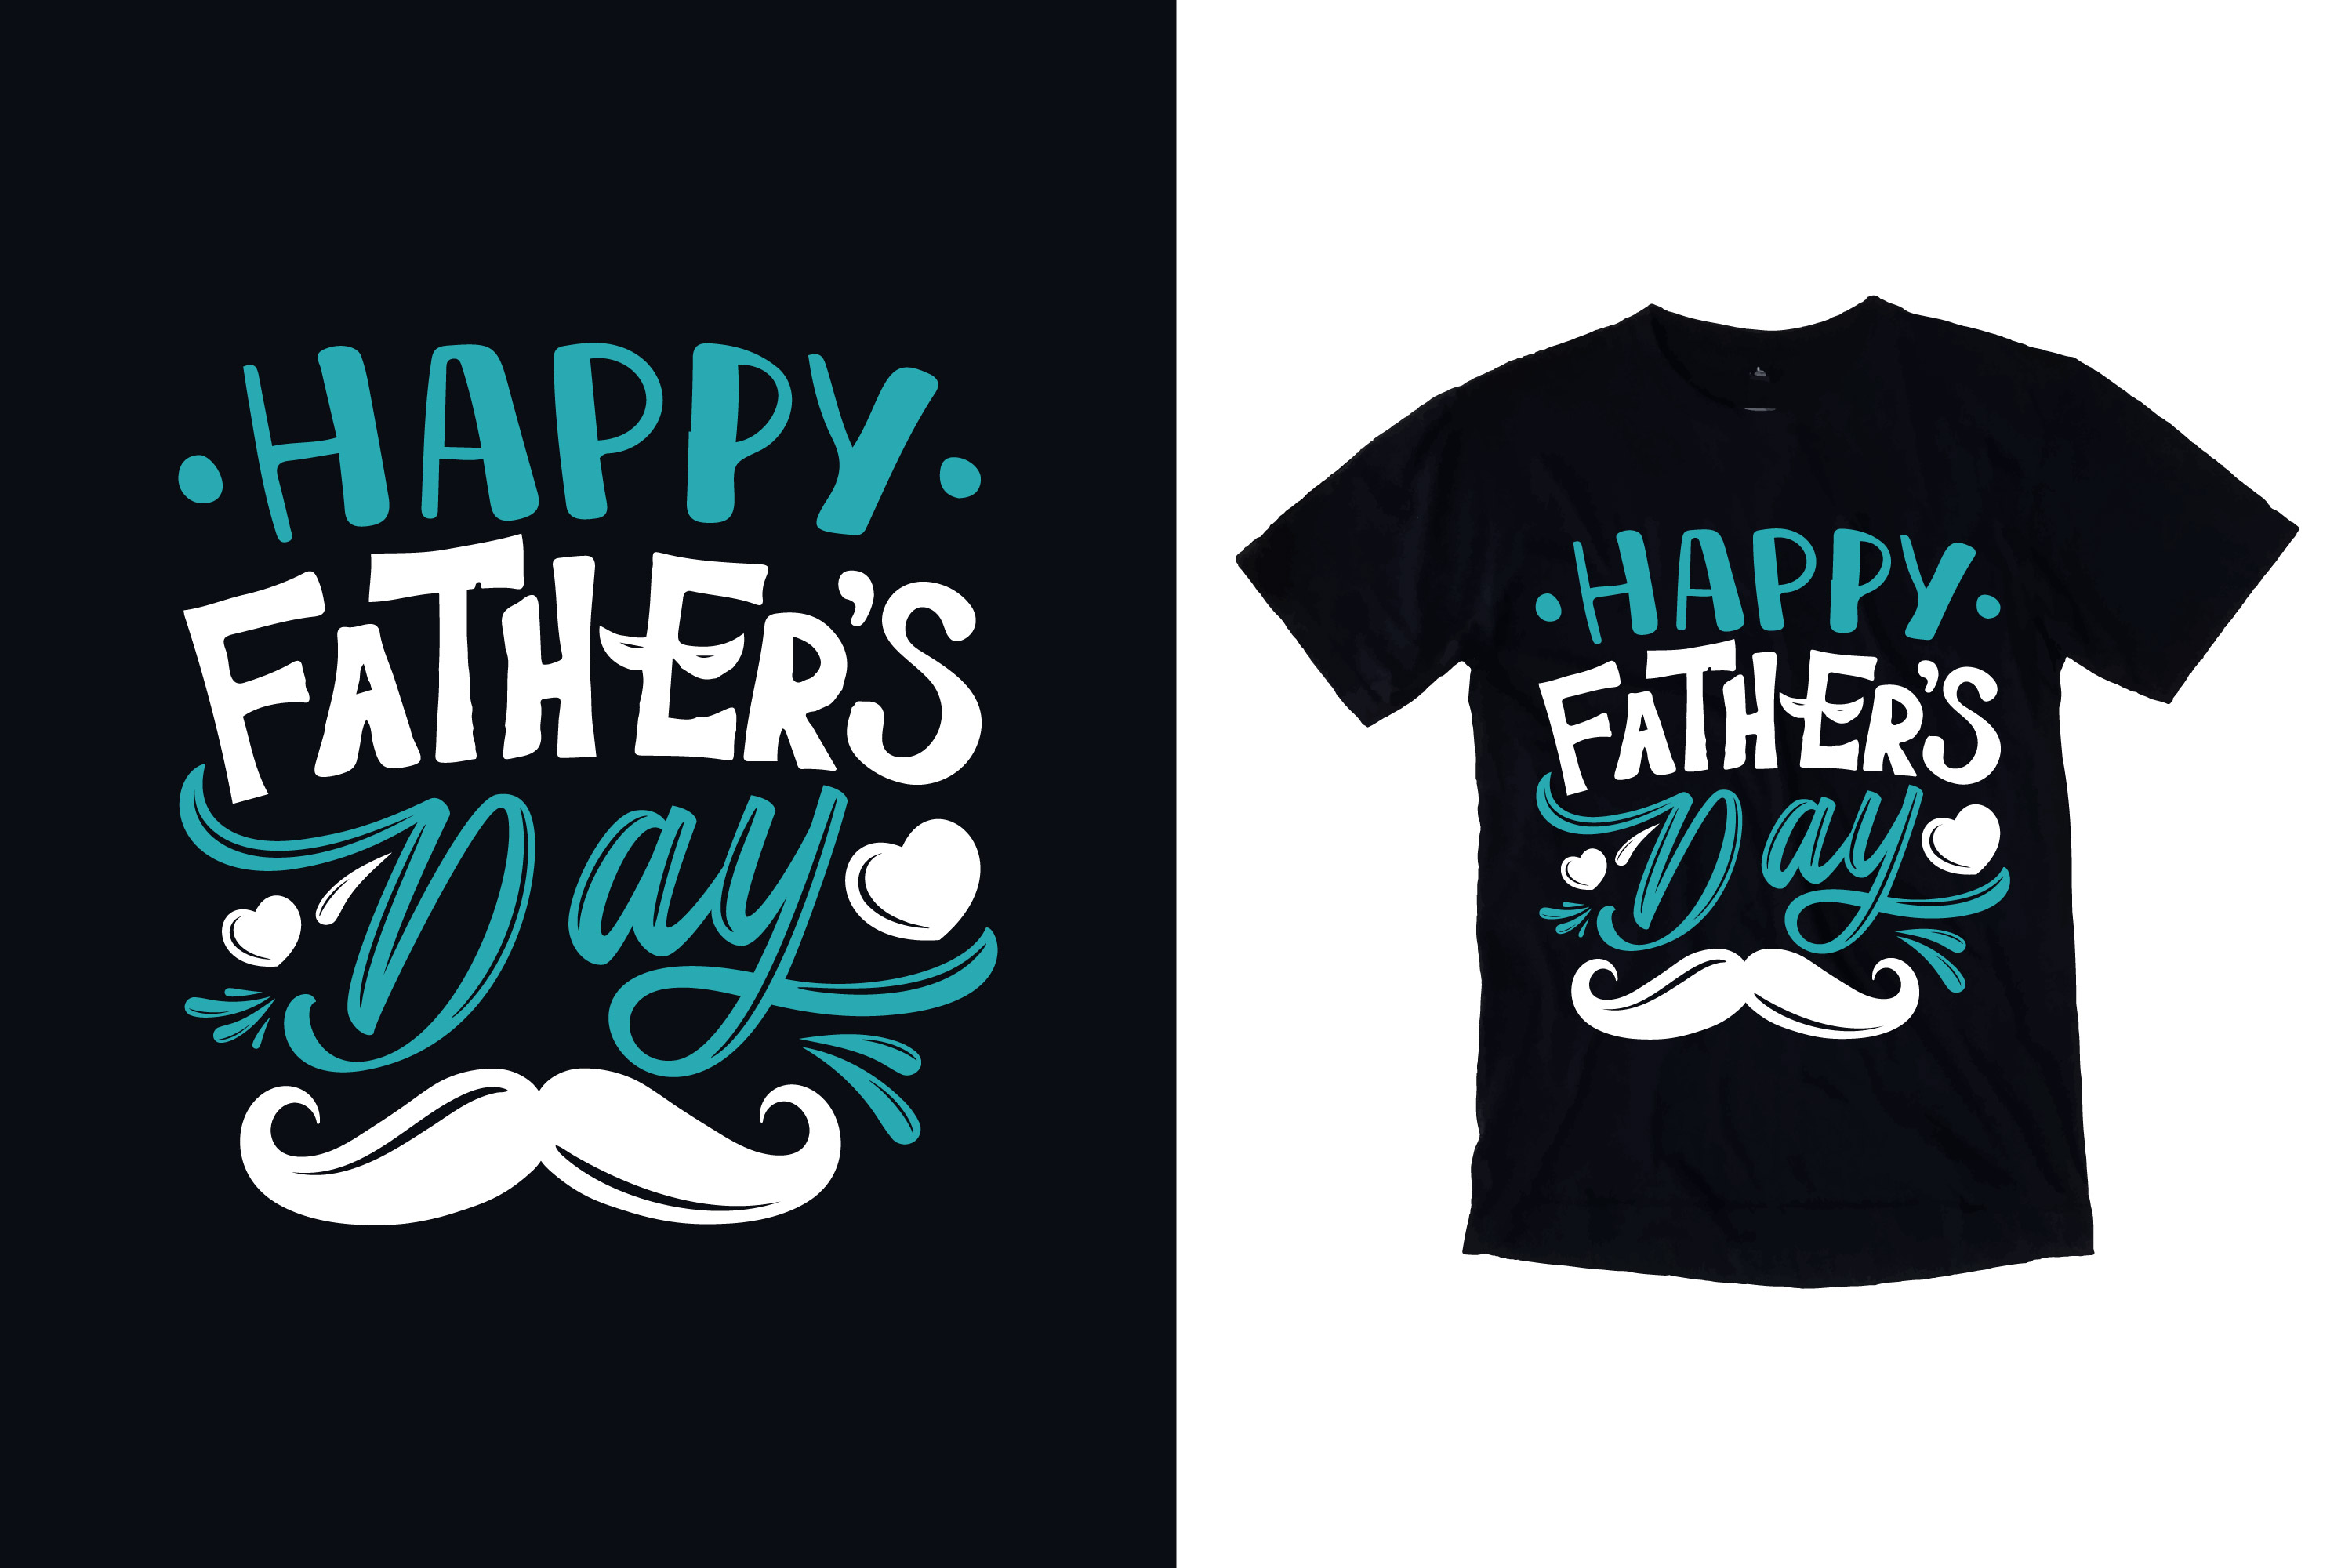 Image of a black t-shirt with a wonderful print on the theme of fatherhood.